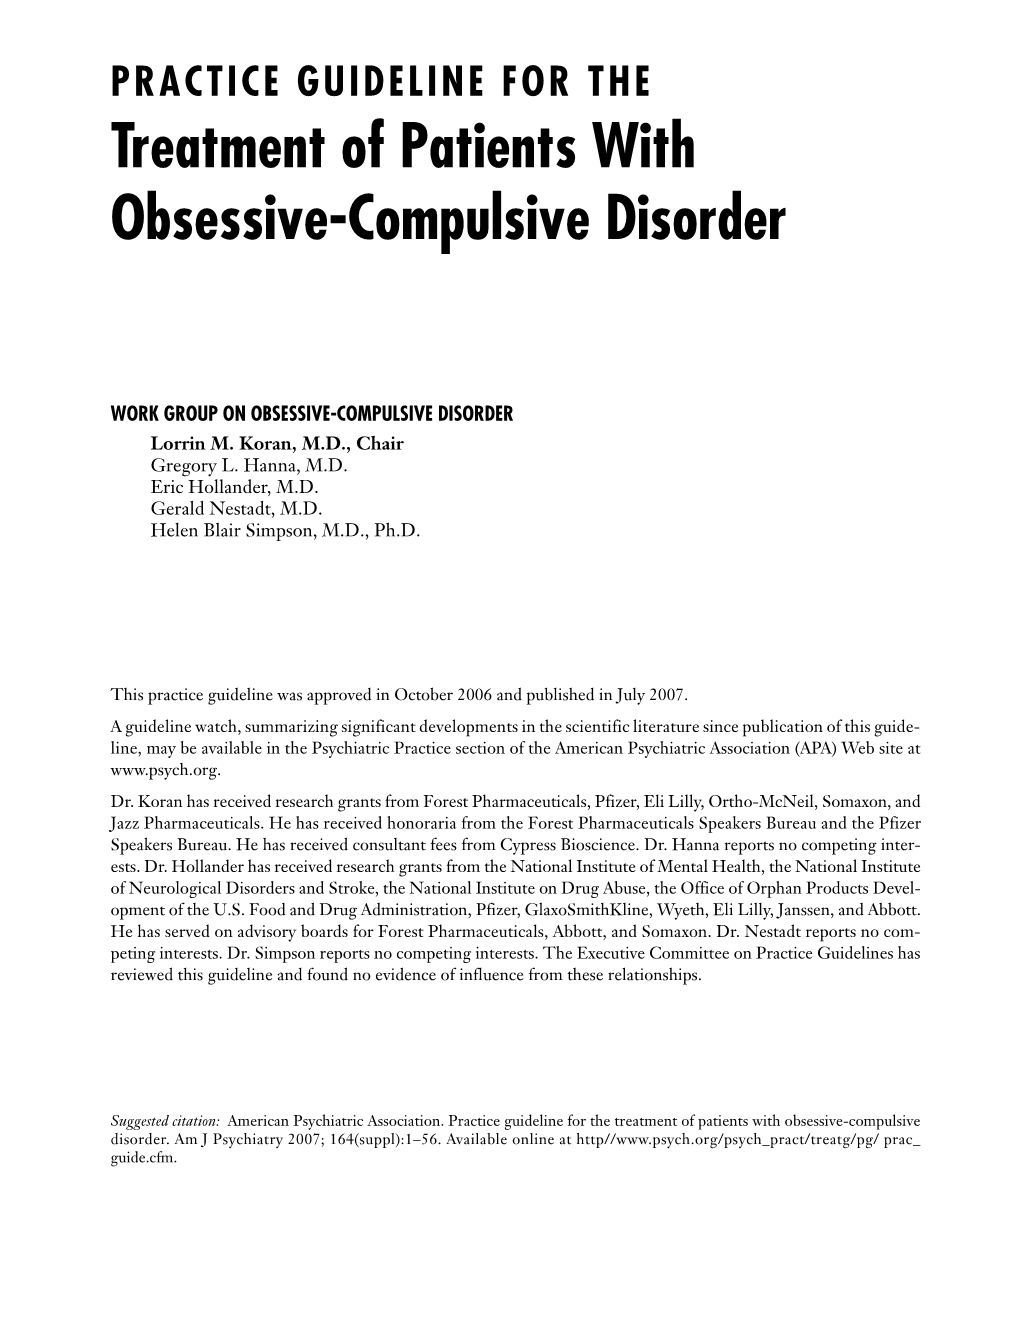 PRACTICE GUIDELINE for the Treatment of Patients with Obsessive-Compulsive Disorder